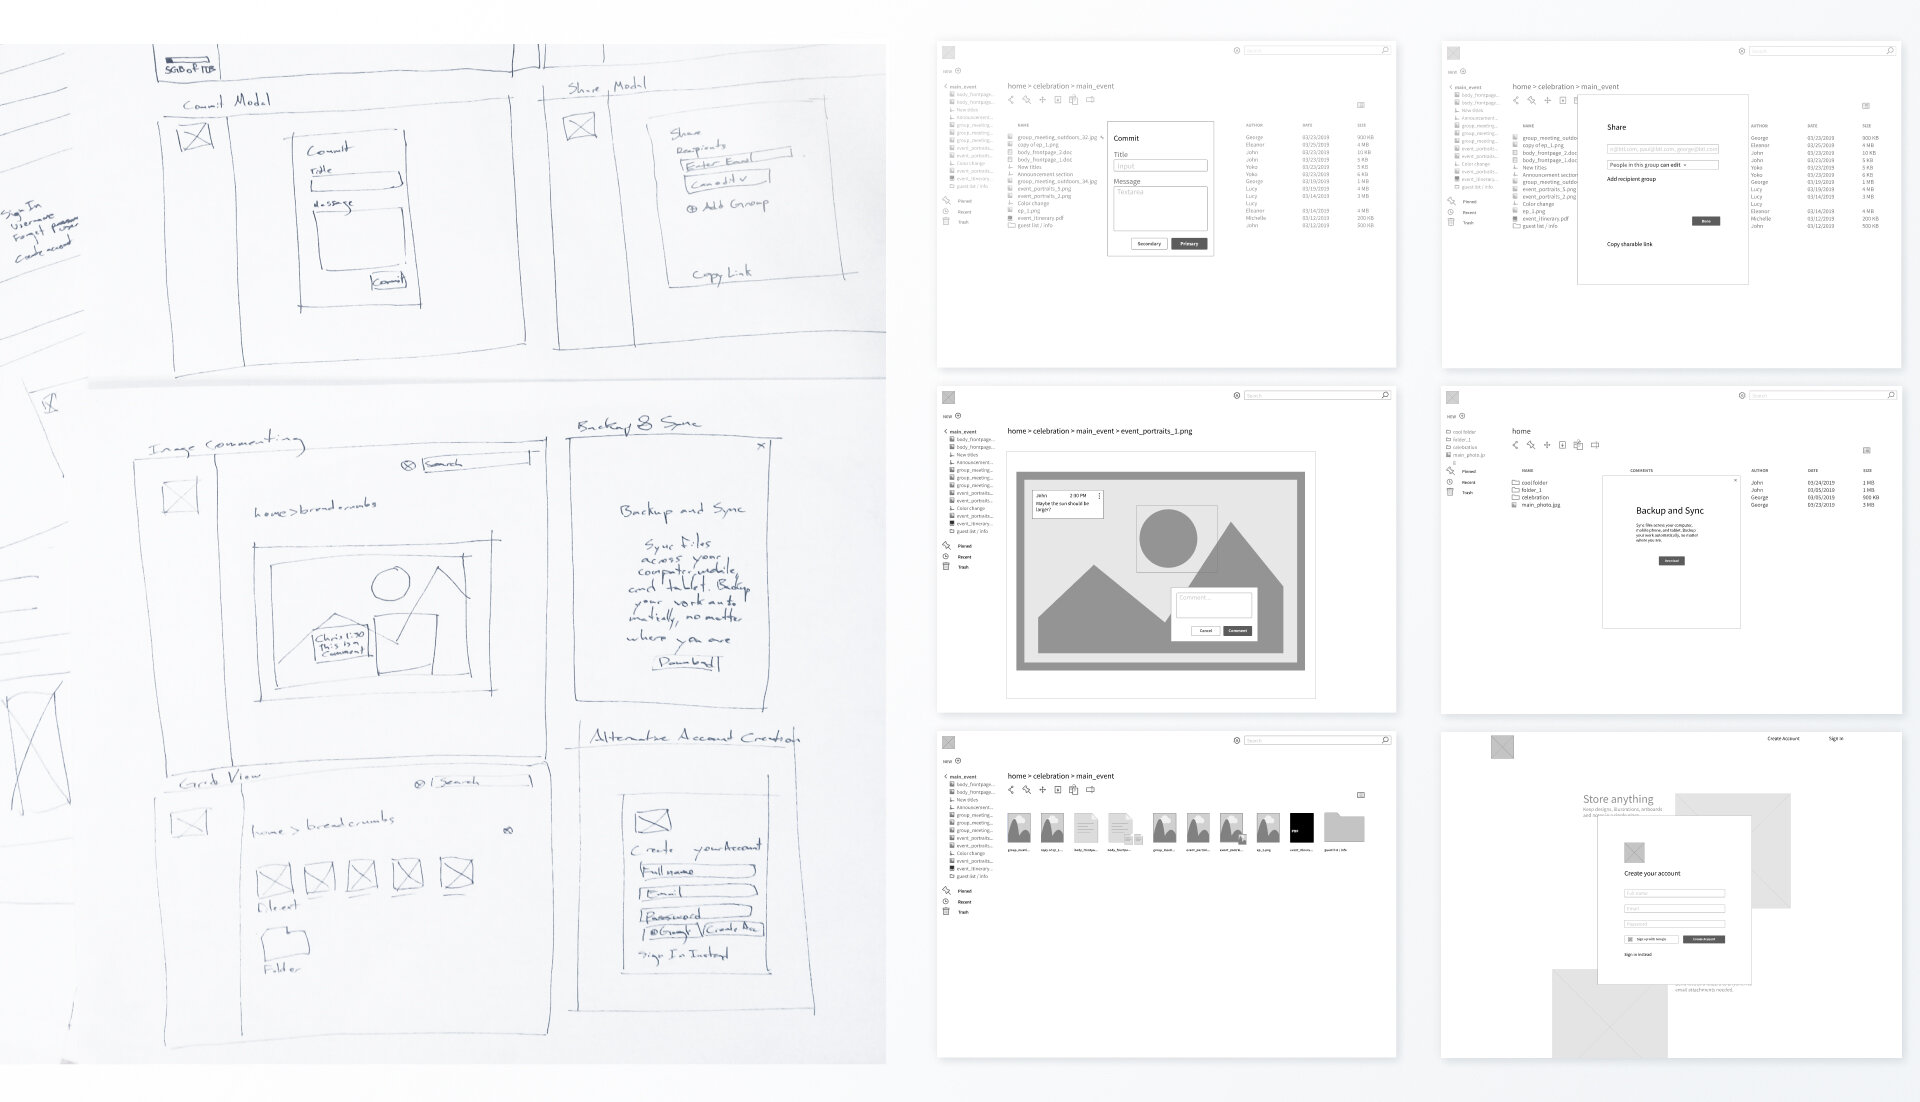 Pen and paper sketches of Cira wireframes next to digital versions